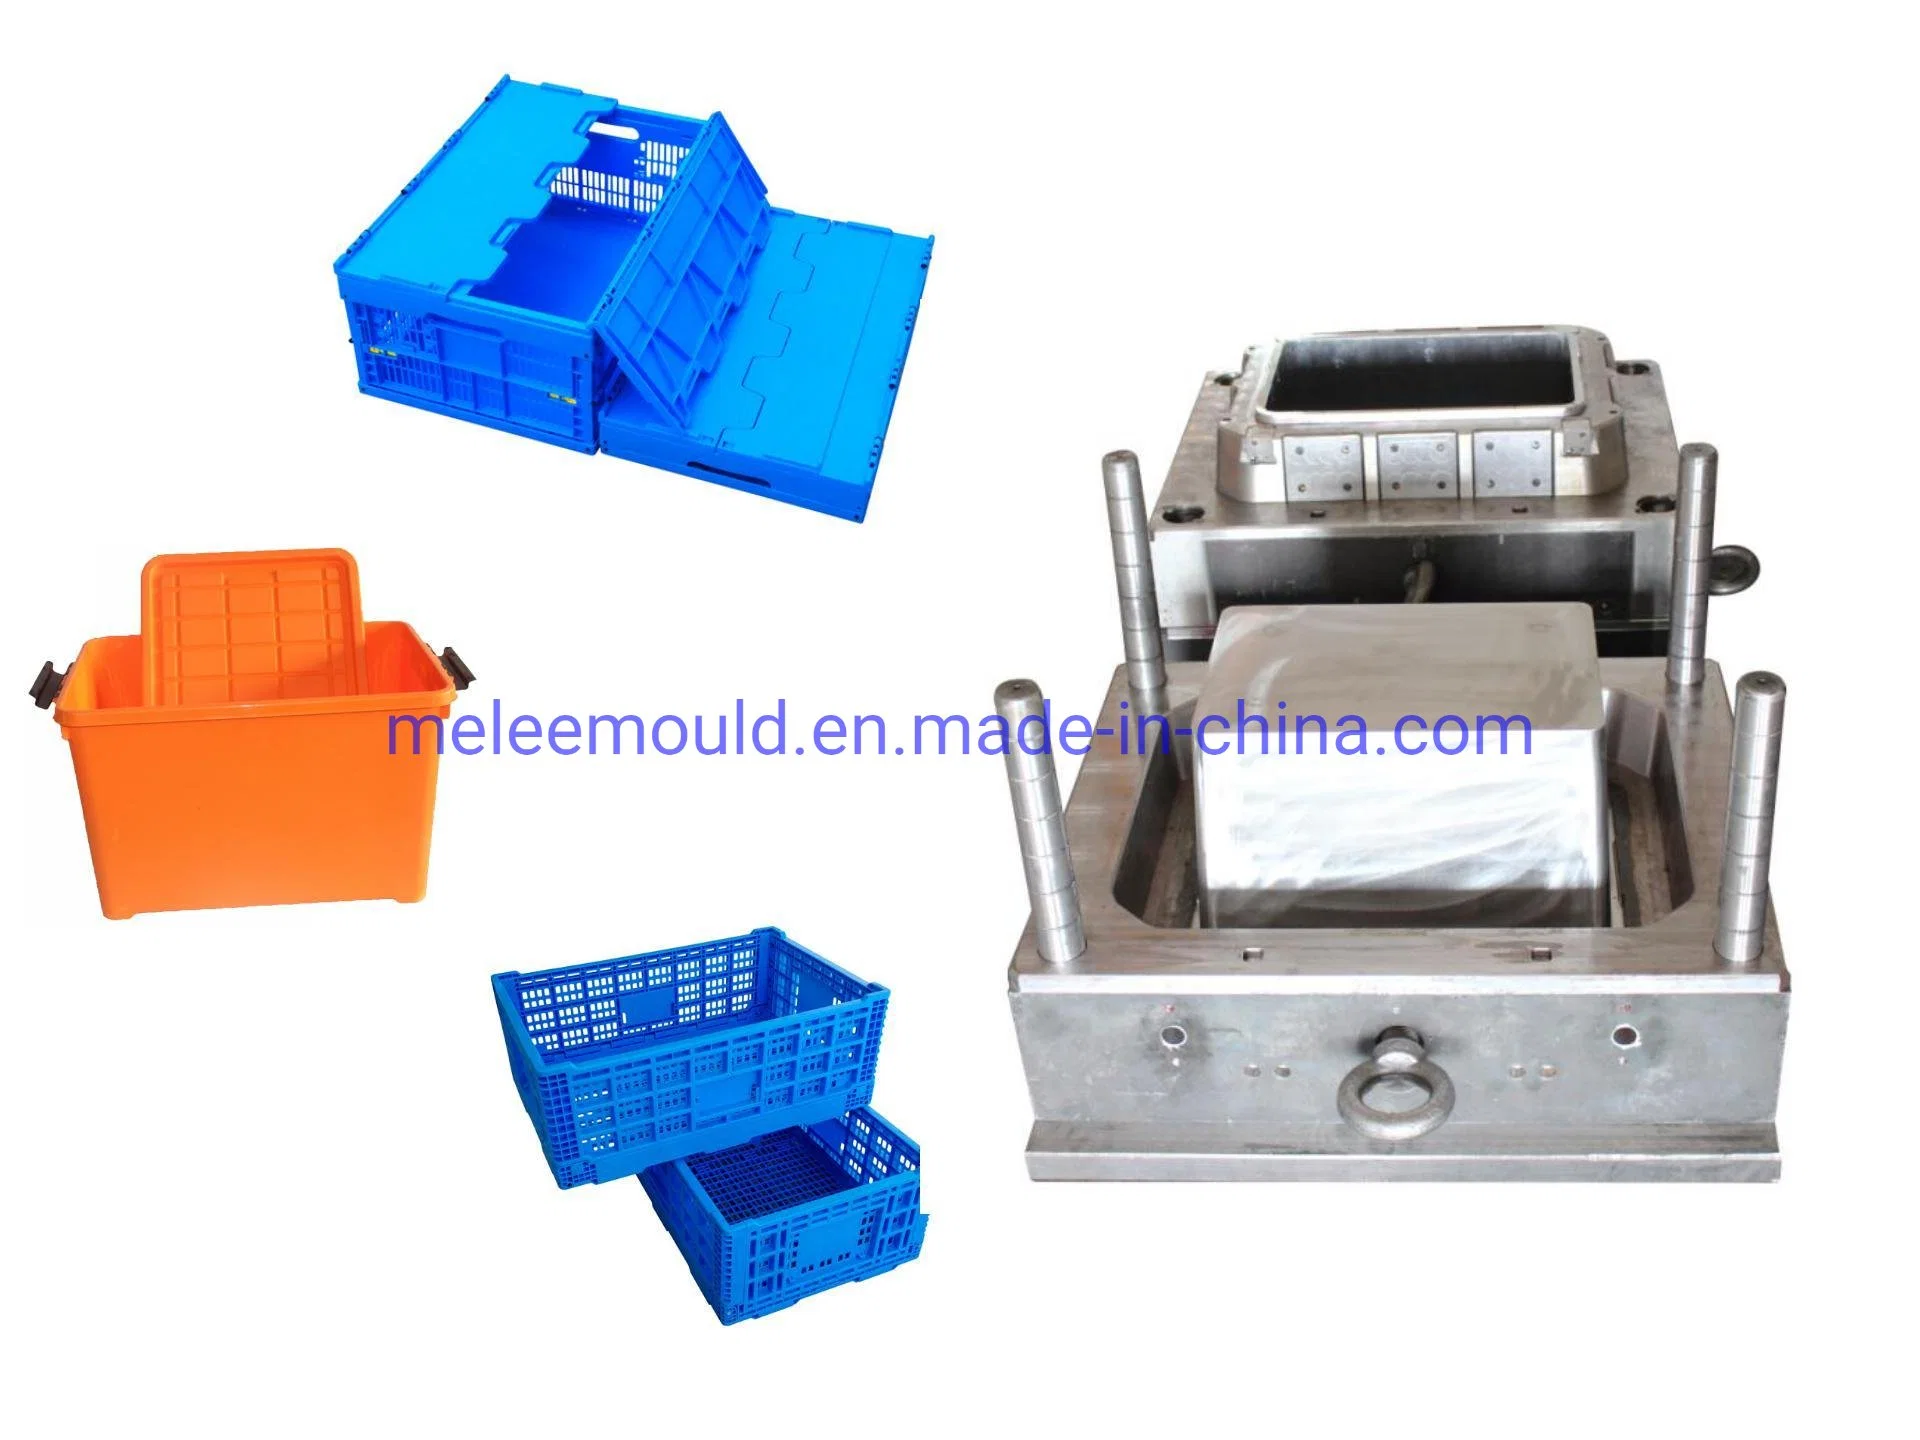 Cheaper Second Hand Plastic Injection Used Crate Molds, Turnover Box Molding, Folded Circulating Box Collapsible Revolving Case Molds